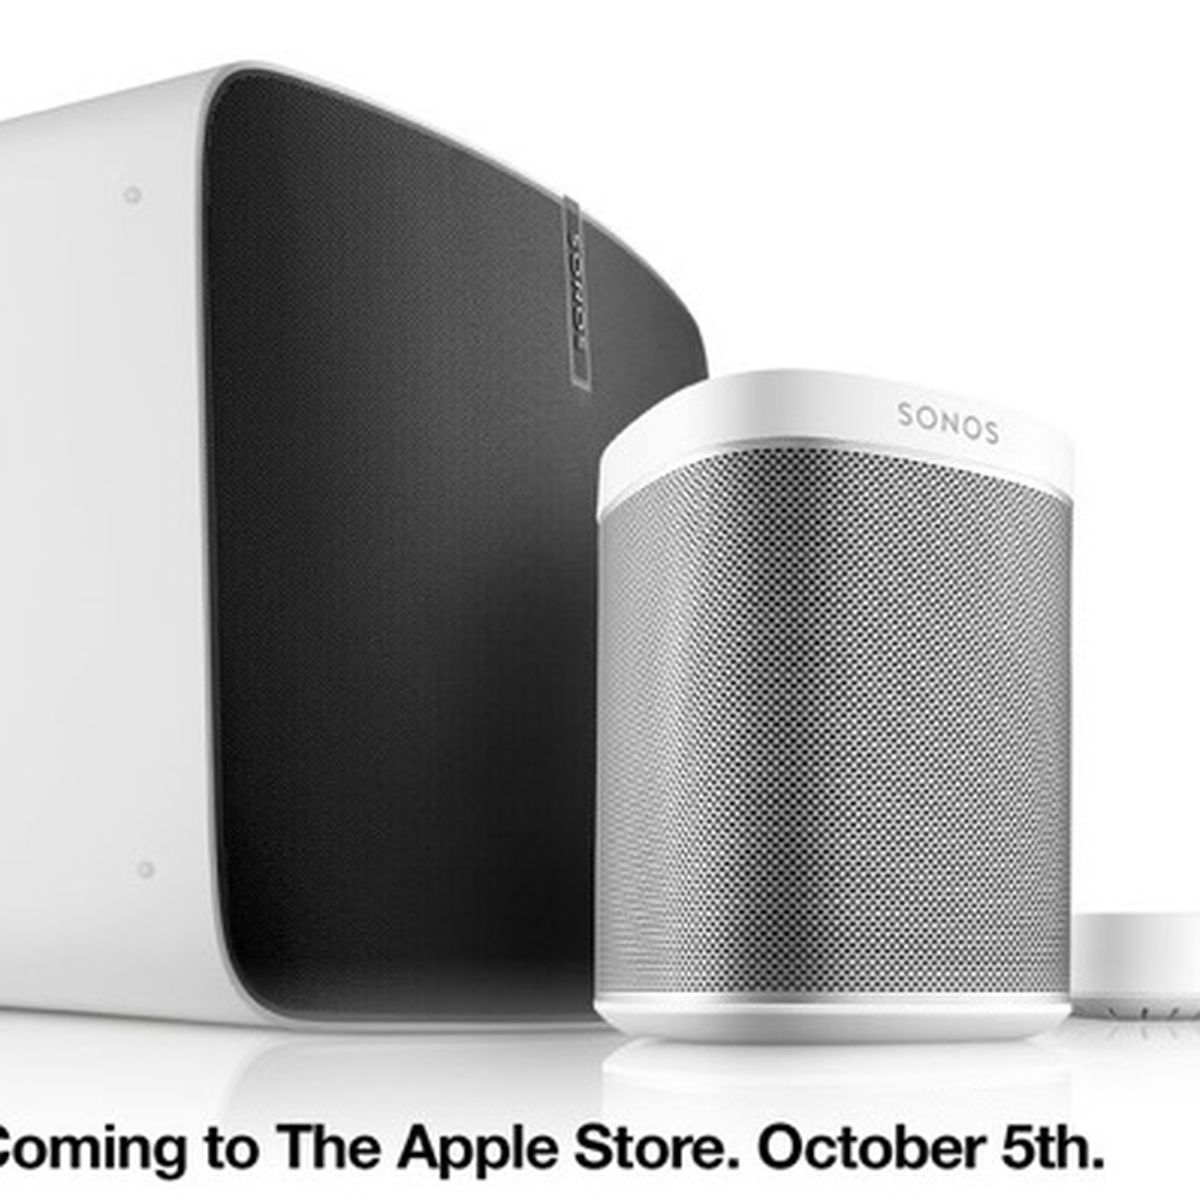 Sonos Speakers Launch at Apple Stores Today With Free Apple Gift Card Offer MacRumors